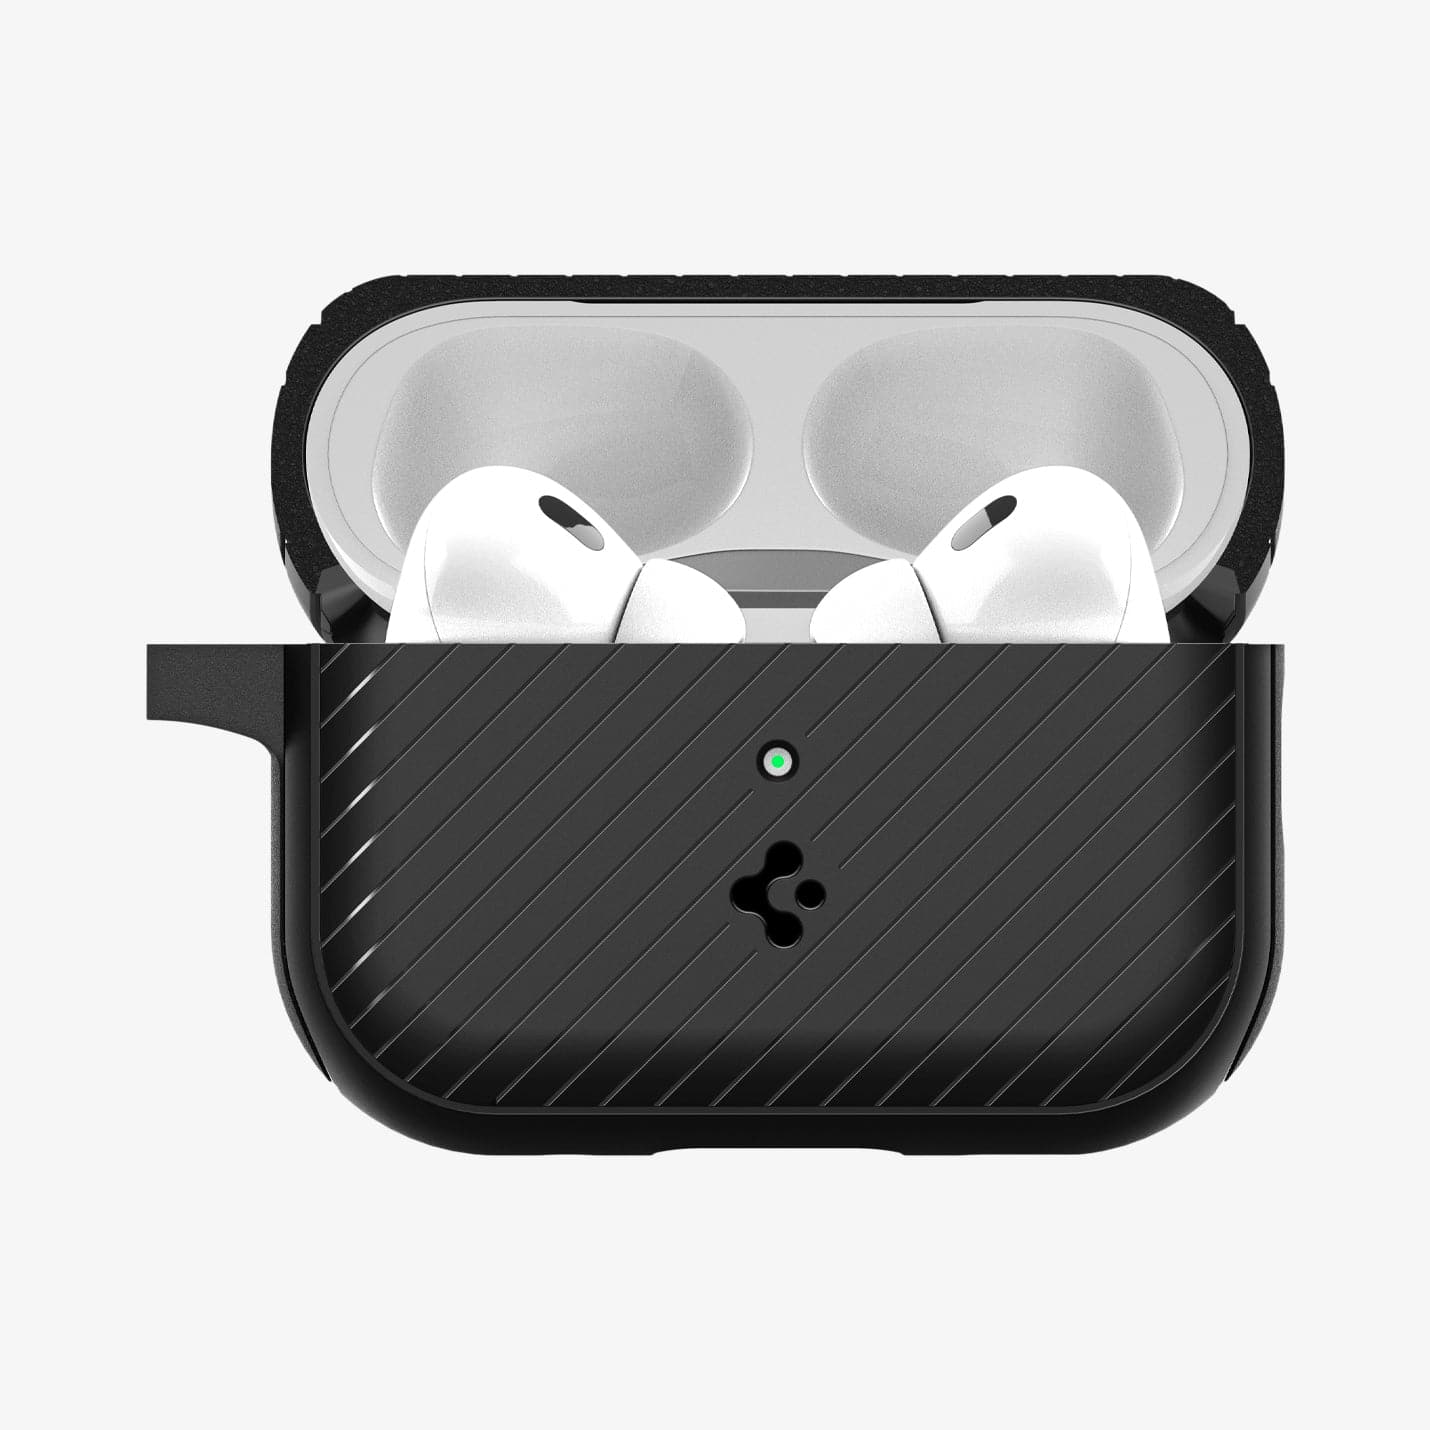 ACS05484 - Apple AirPods Pro 2 Case Mag Armor (MagFit) in matte black showing the front with top open and AirPods inside